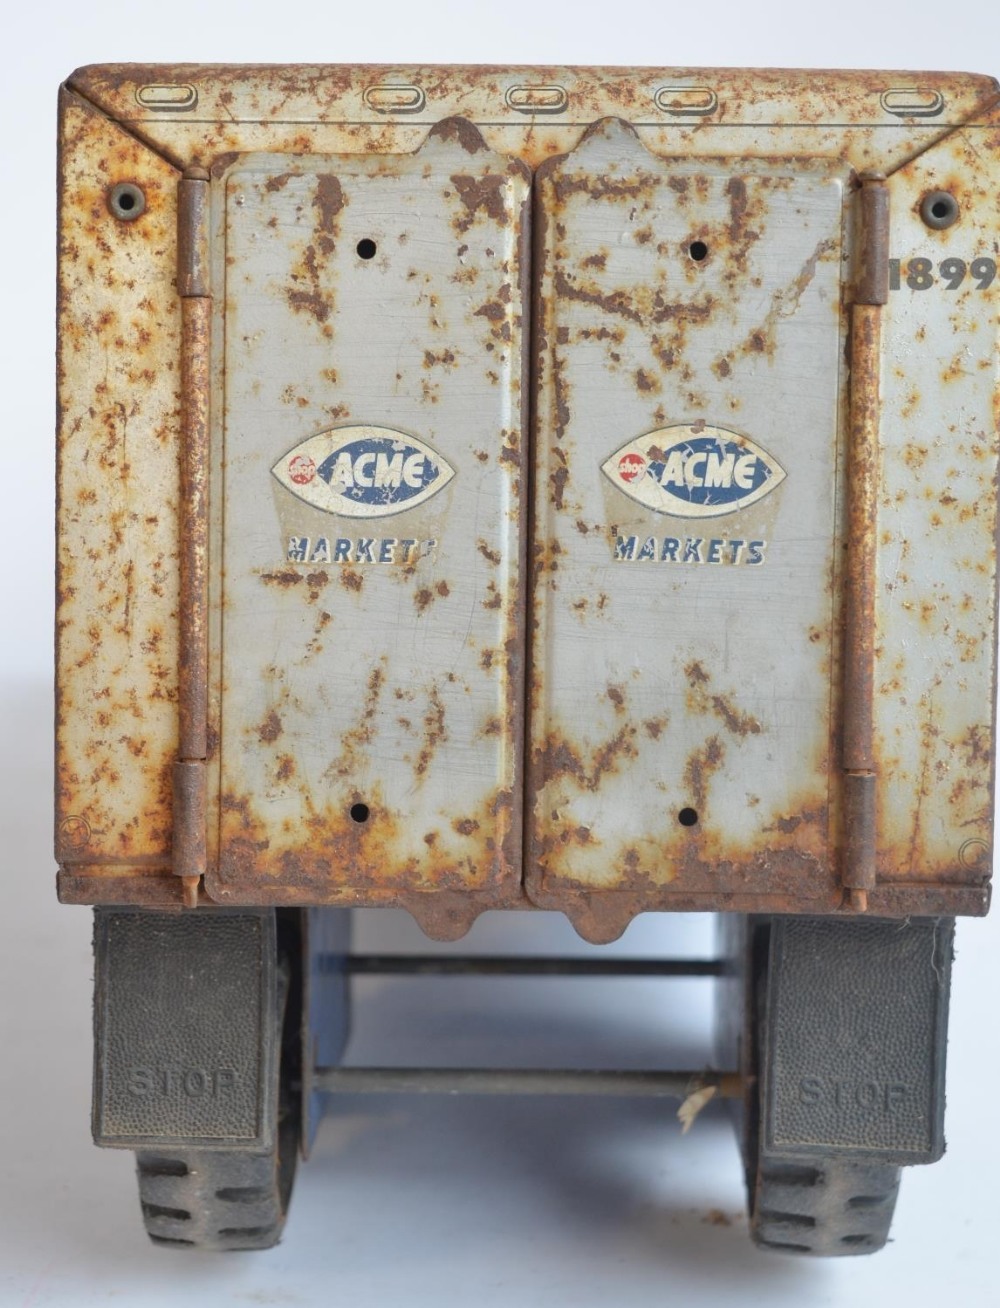 Vintage 1960's Marx tinplate truck and trailer model, "ACME Markets", cab number 1511, trailer - Image 5 of 7